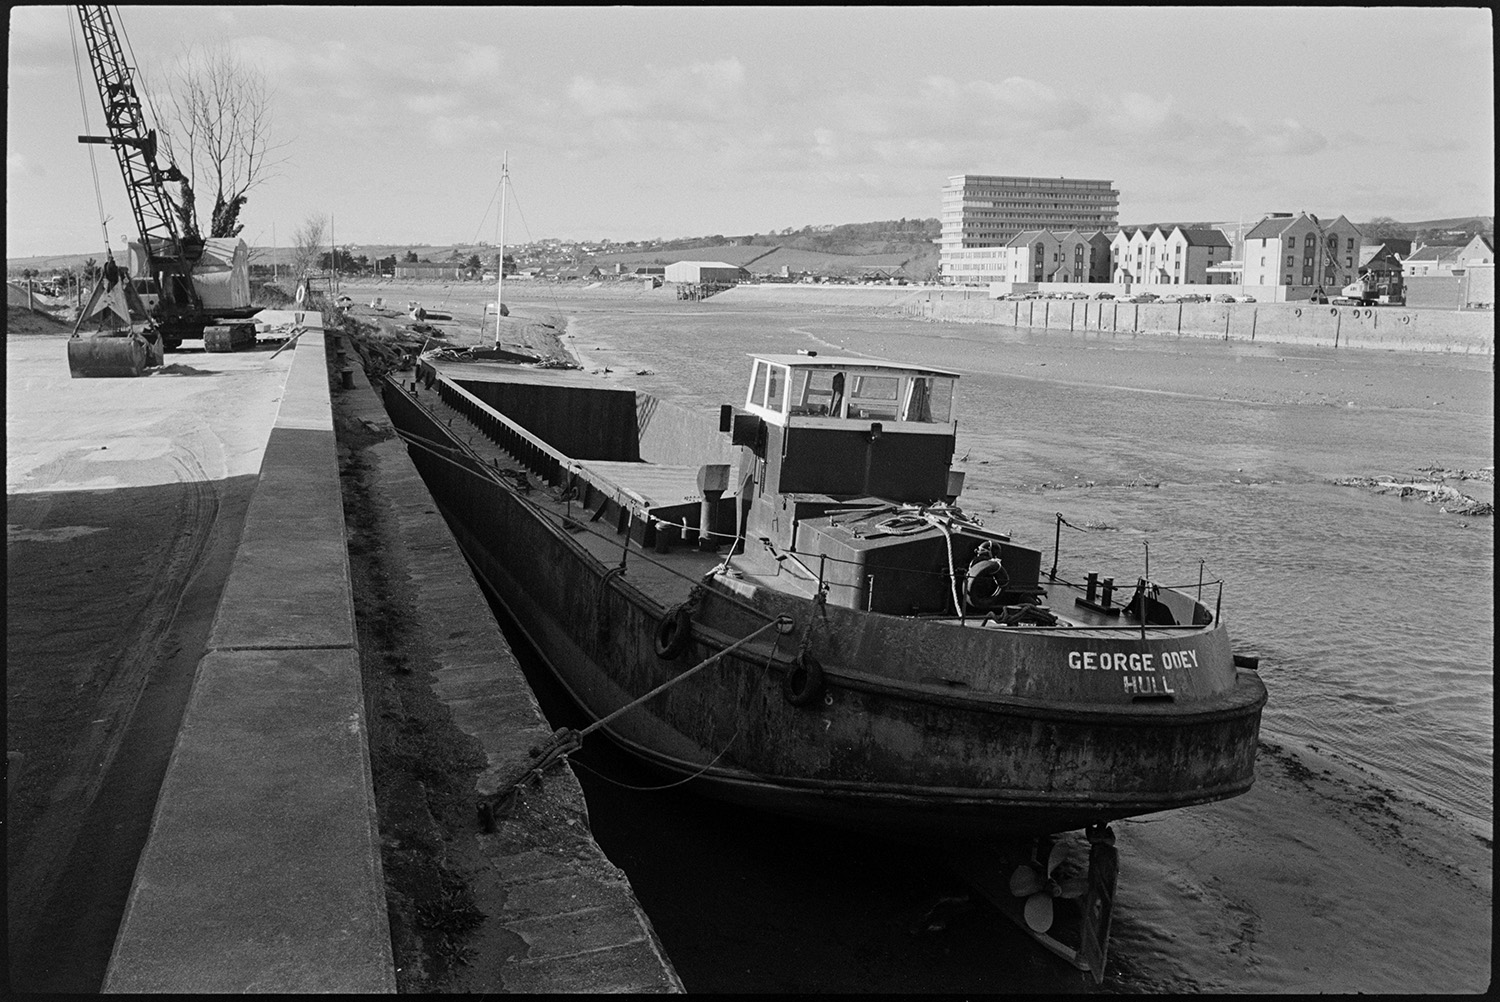 Barges and small boats on river bridge in background.
[Barge with the name George Odey, Hull moored to the bank of the River Taw, just to the west of Barnstaple. A crane with a loading grab is visible on the wharf. Large buildings and houses can be seen on the opposite side of the river.]